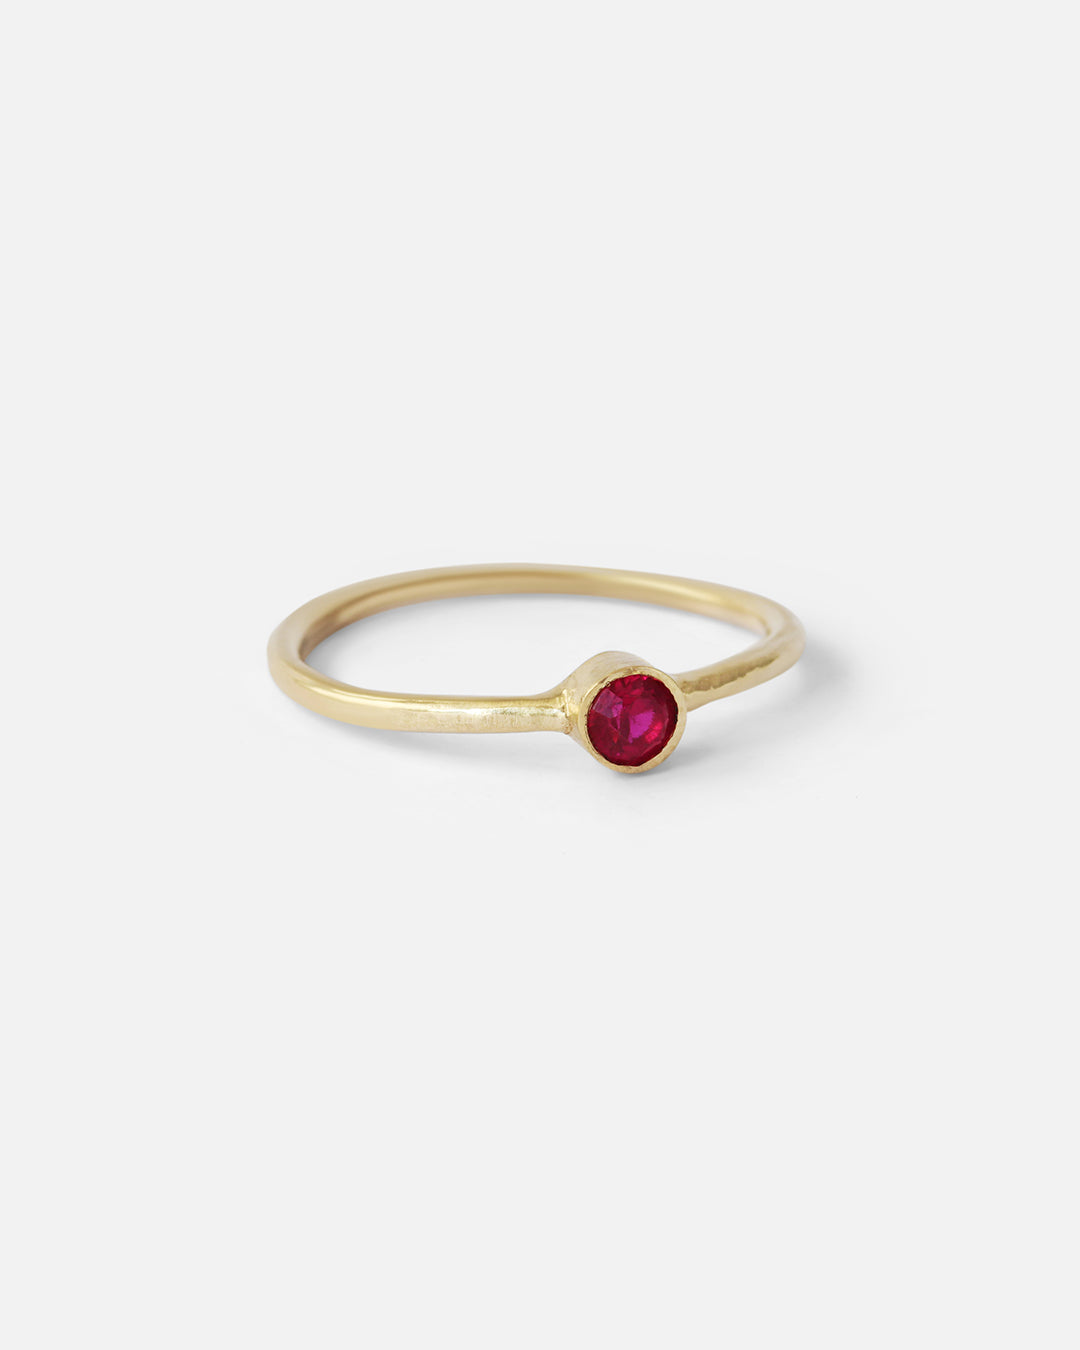 Ruby / Ring By Tricia Kirkland in rings Category